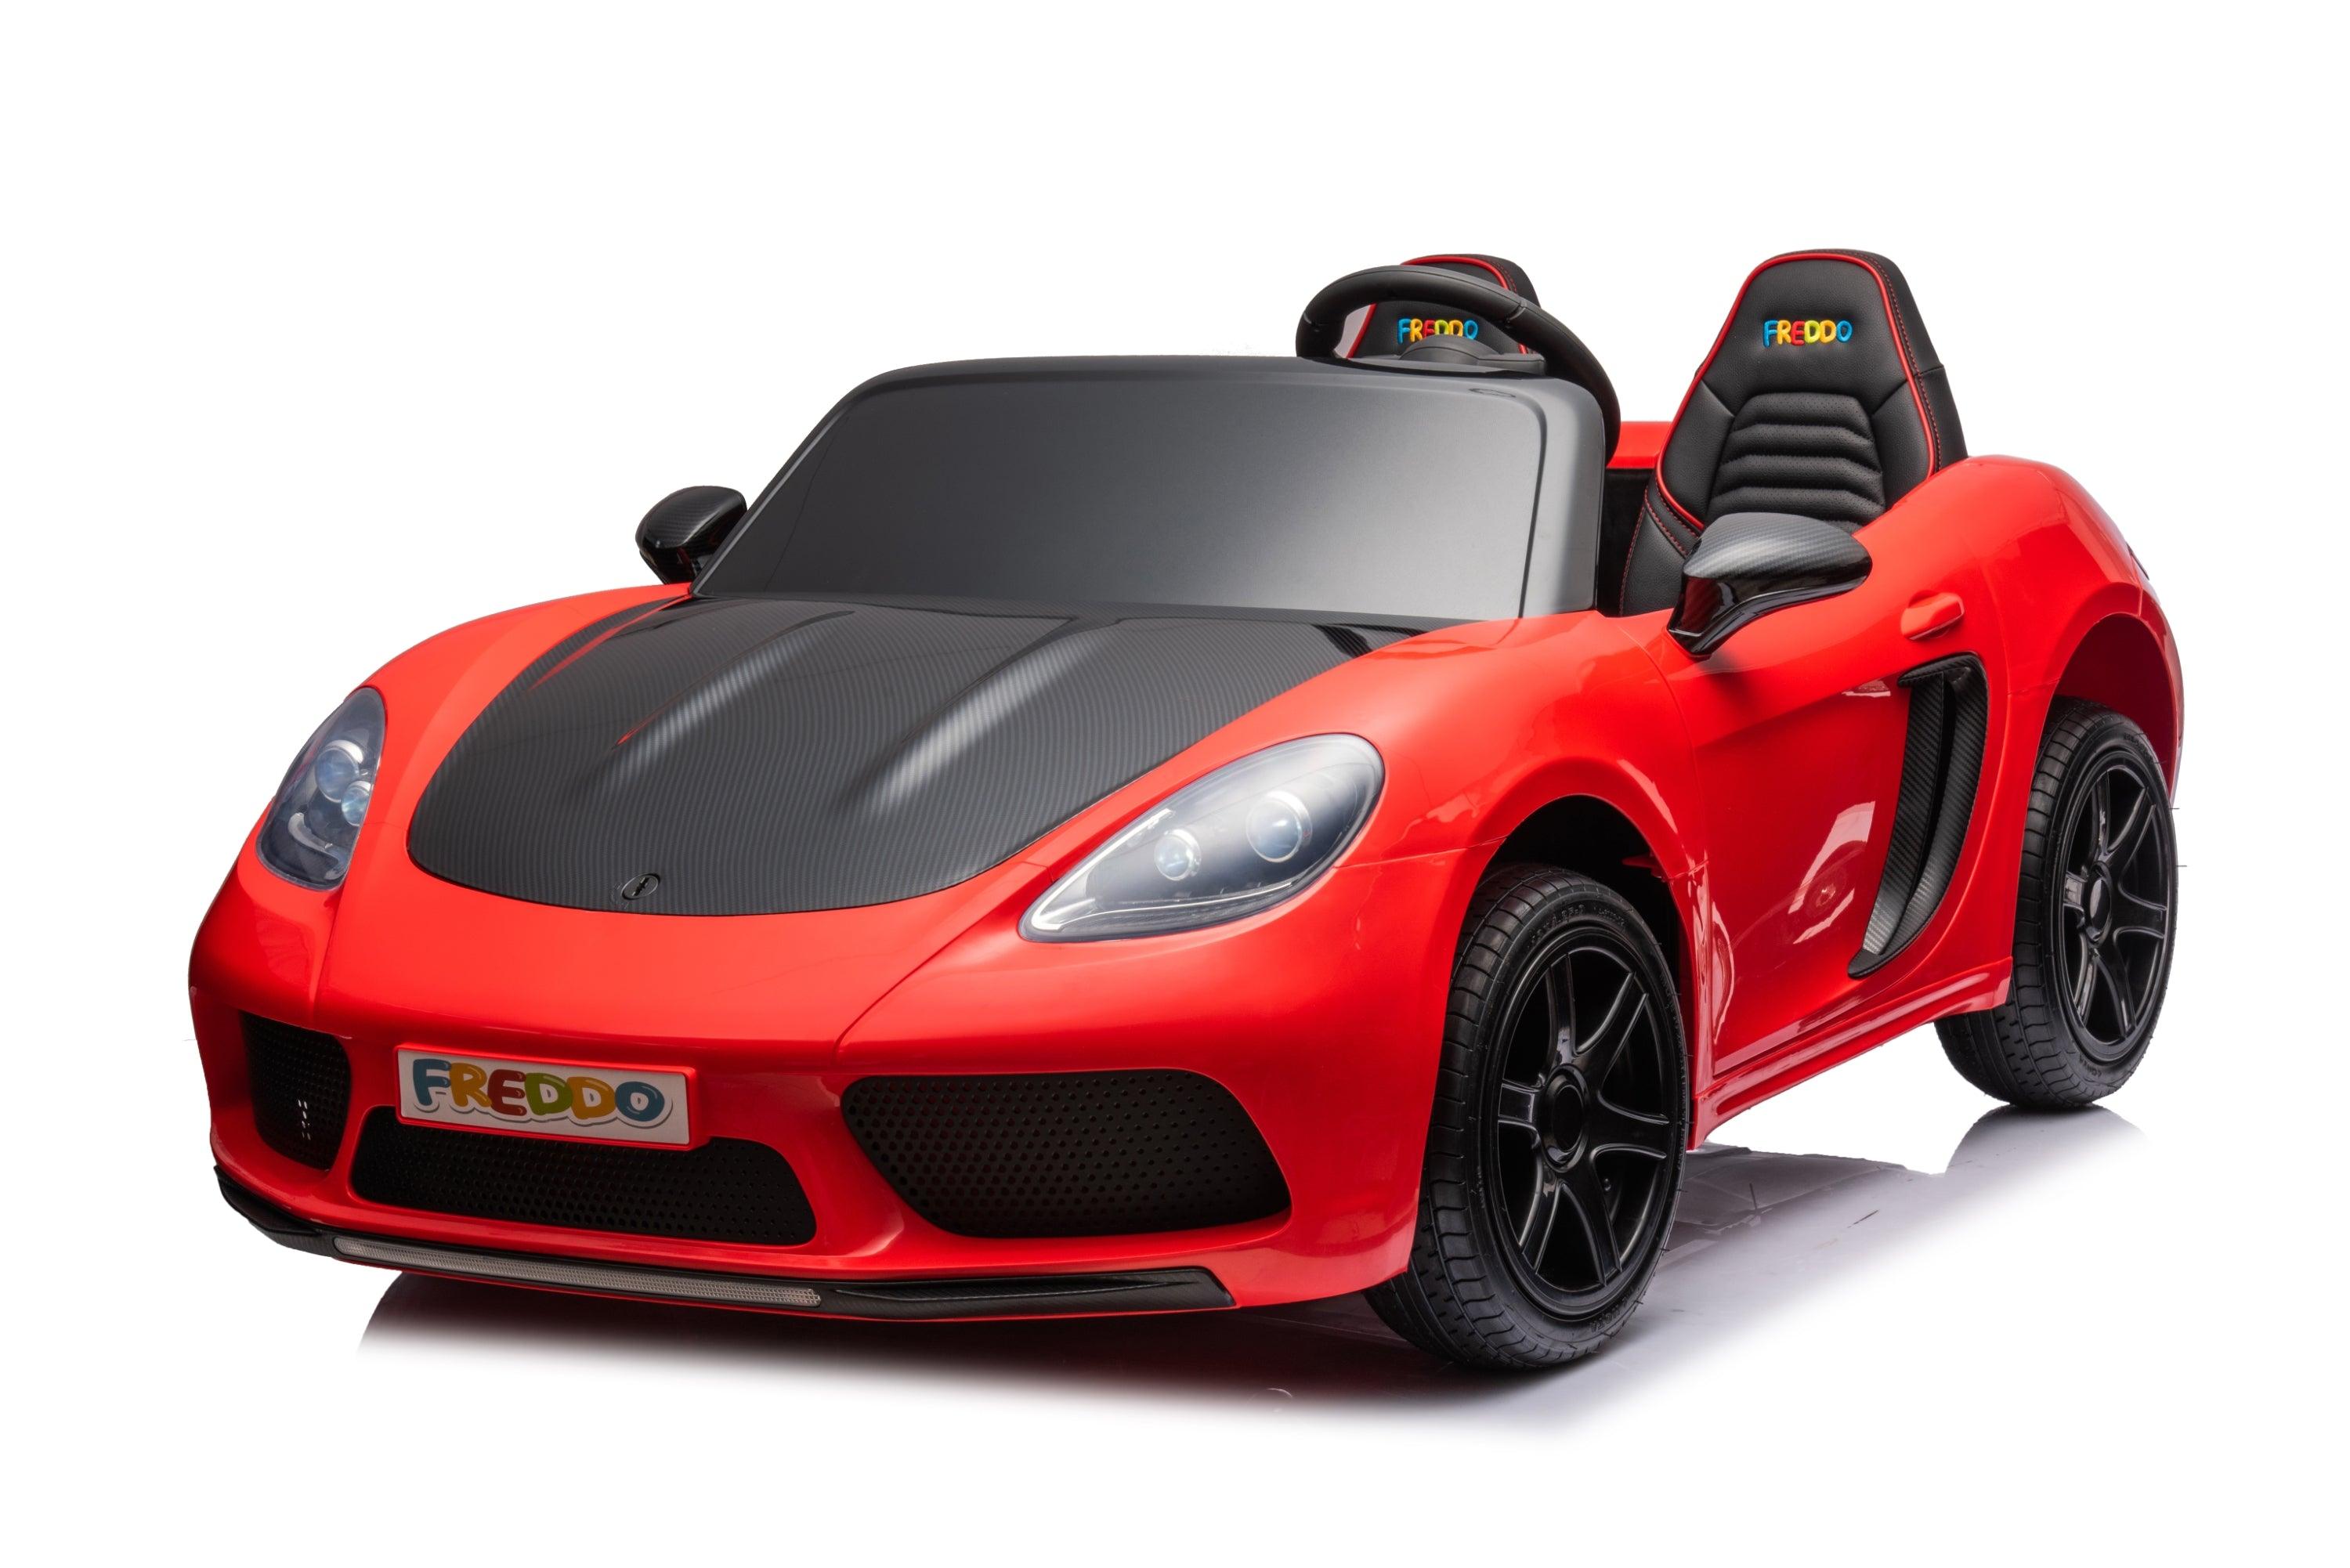 48V Freddo Rocket: World's Fastest 2-Seater Kids' Ride-On with Advanced Brushless Motor & Precision Differential - DTI Direct Canada